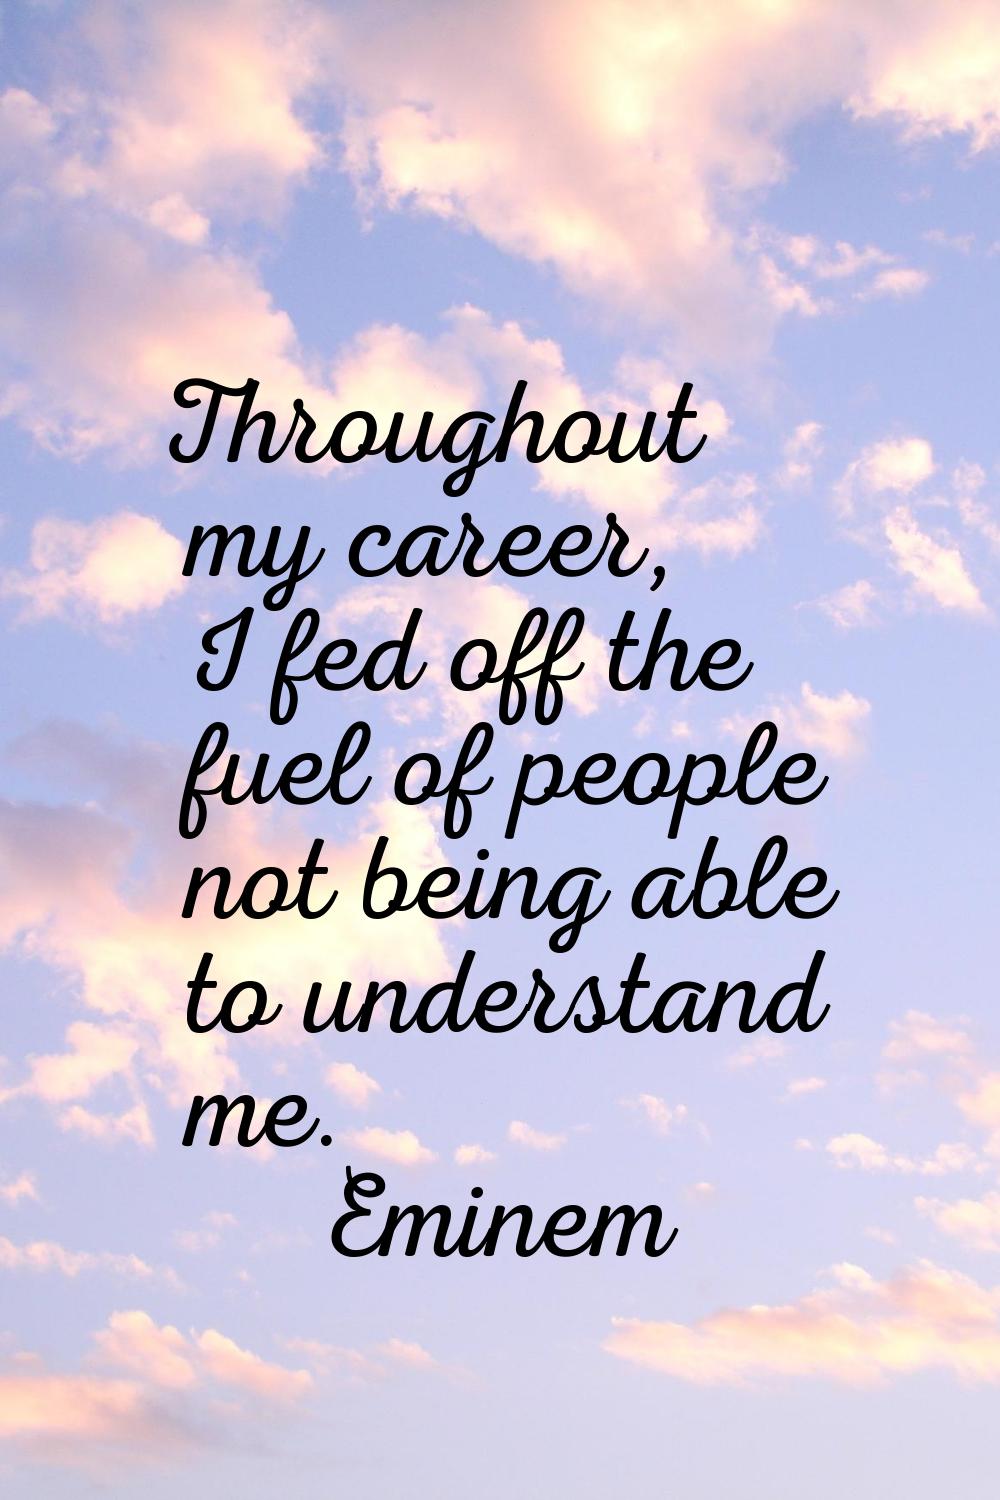 Throughout my career, I fed off the fuel of people not being able to understand me.